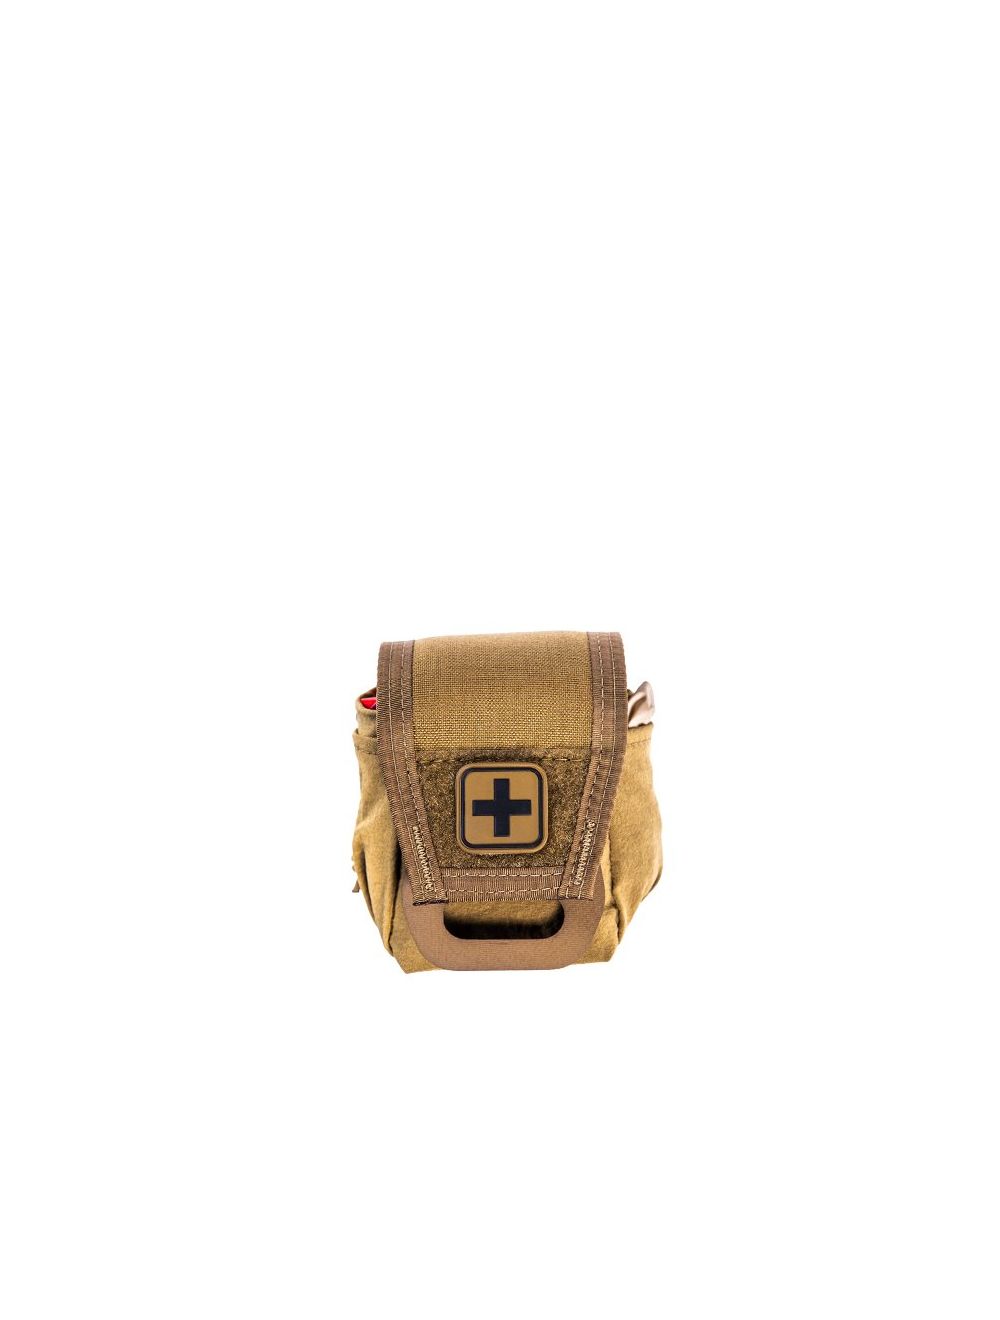 ReVive Medical Pouch